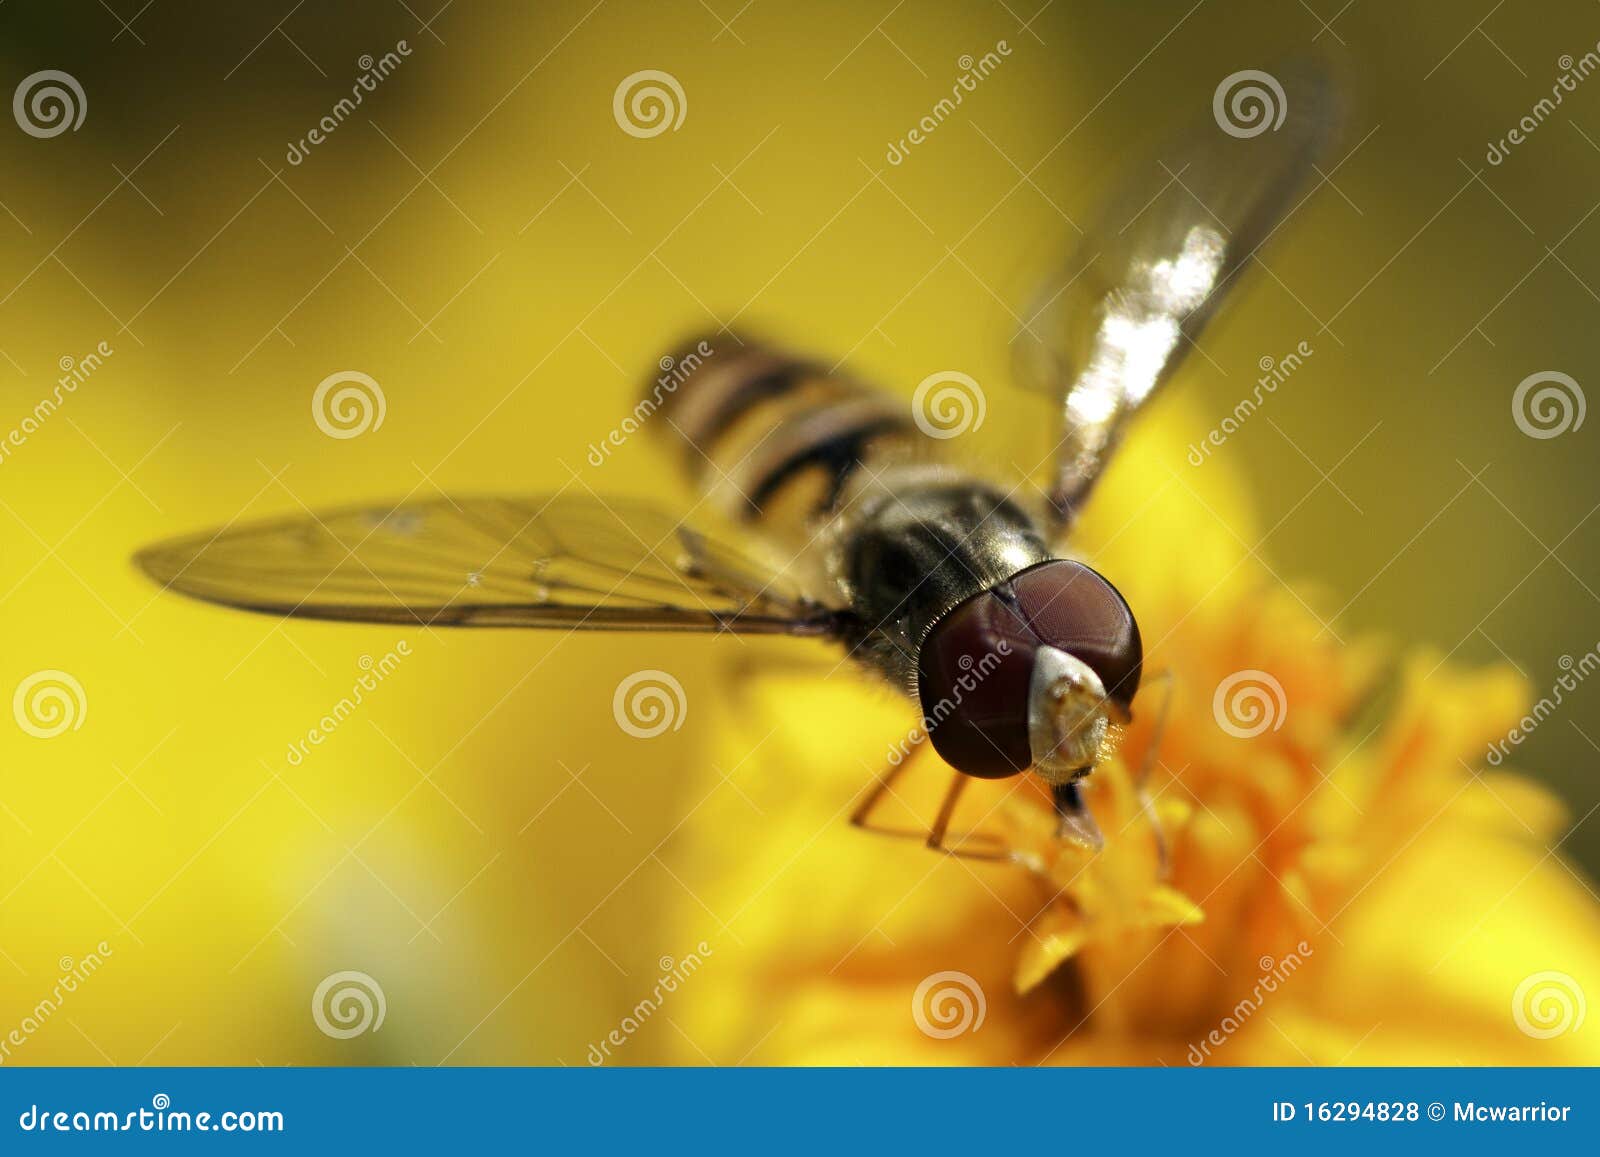 hover fly.